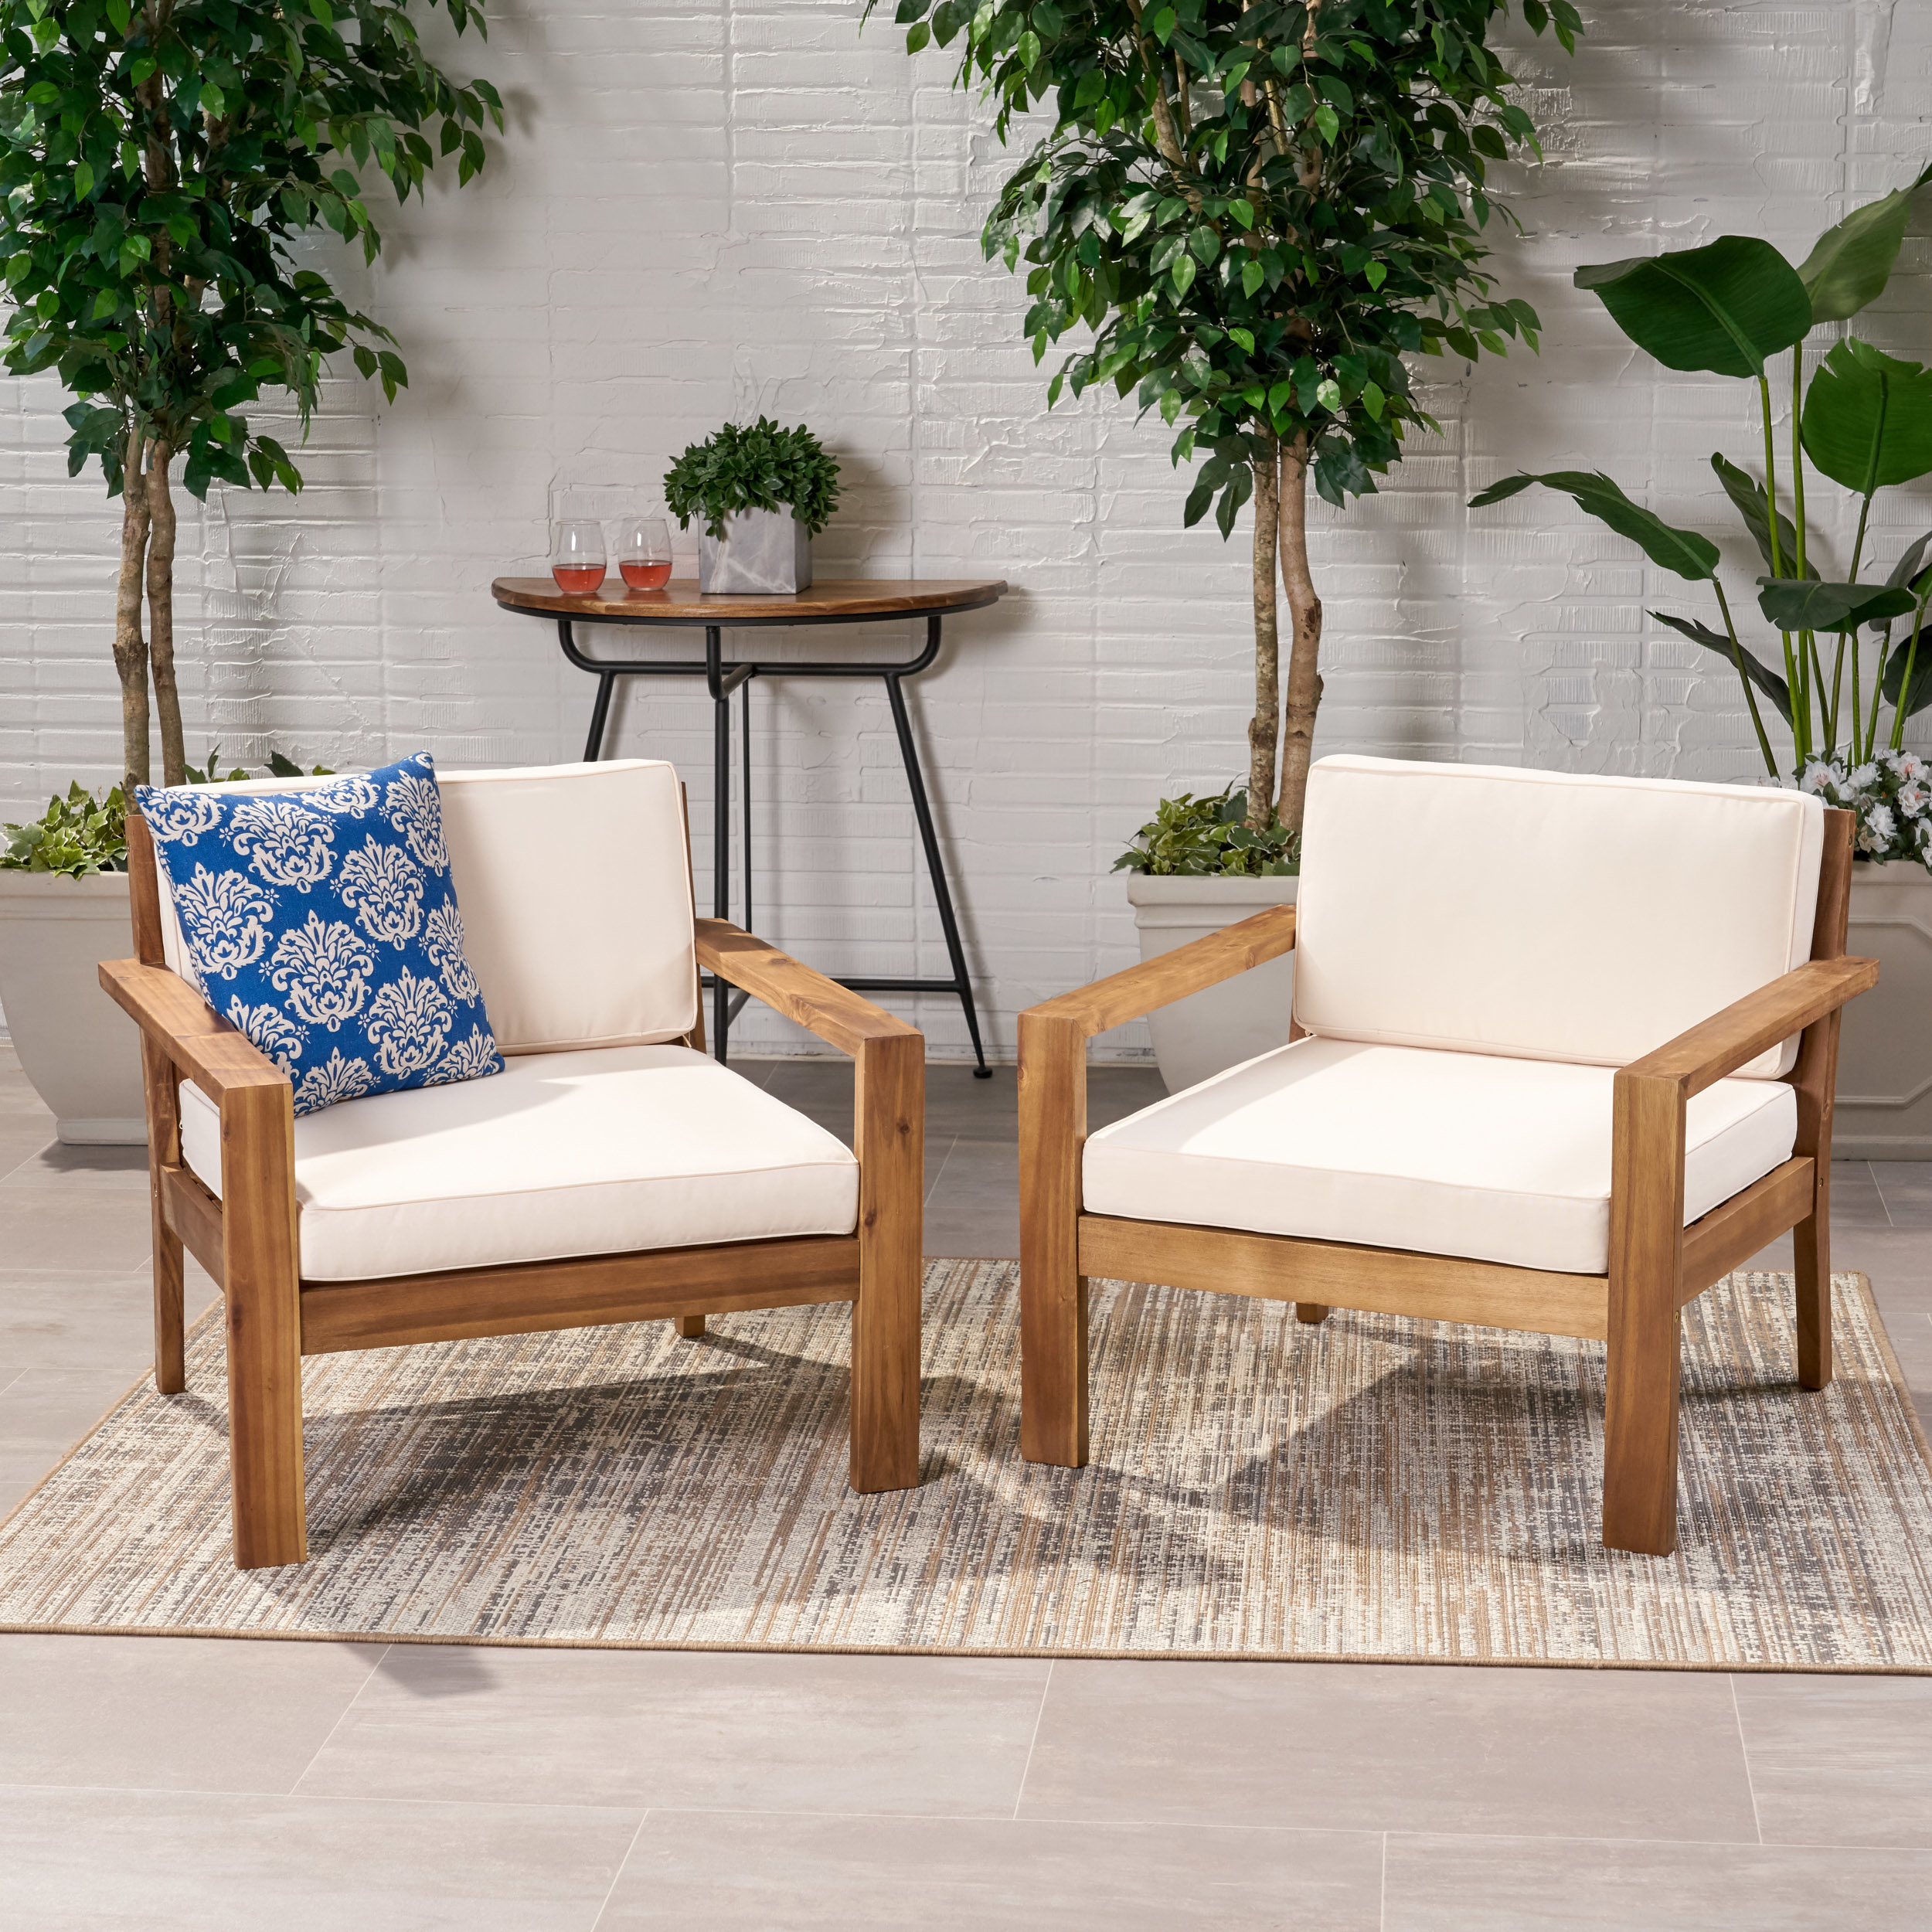 Afra Outdoor Acacia Wood Club Chairs With Cushions (Set Of 2) - Teak Finish, Cream